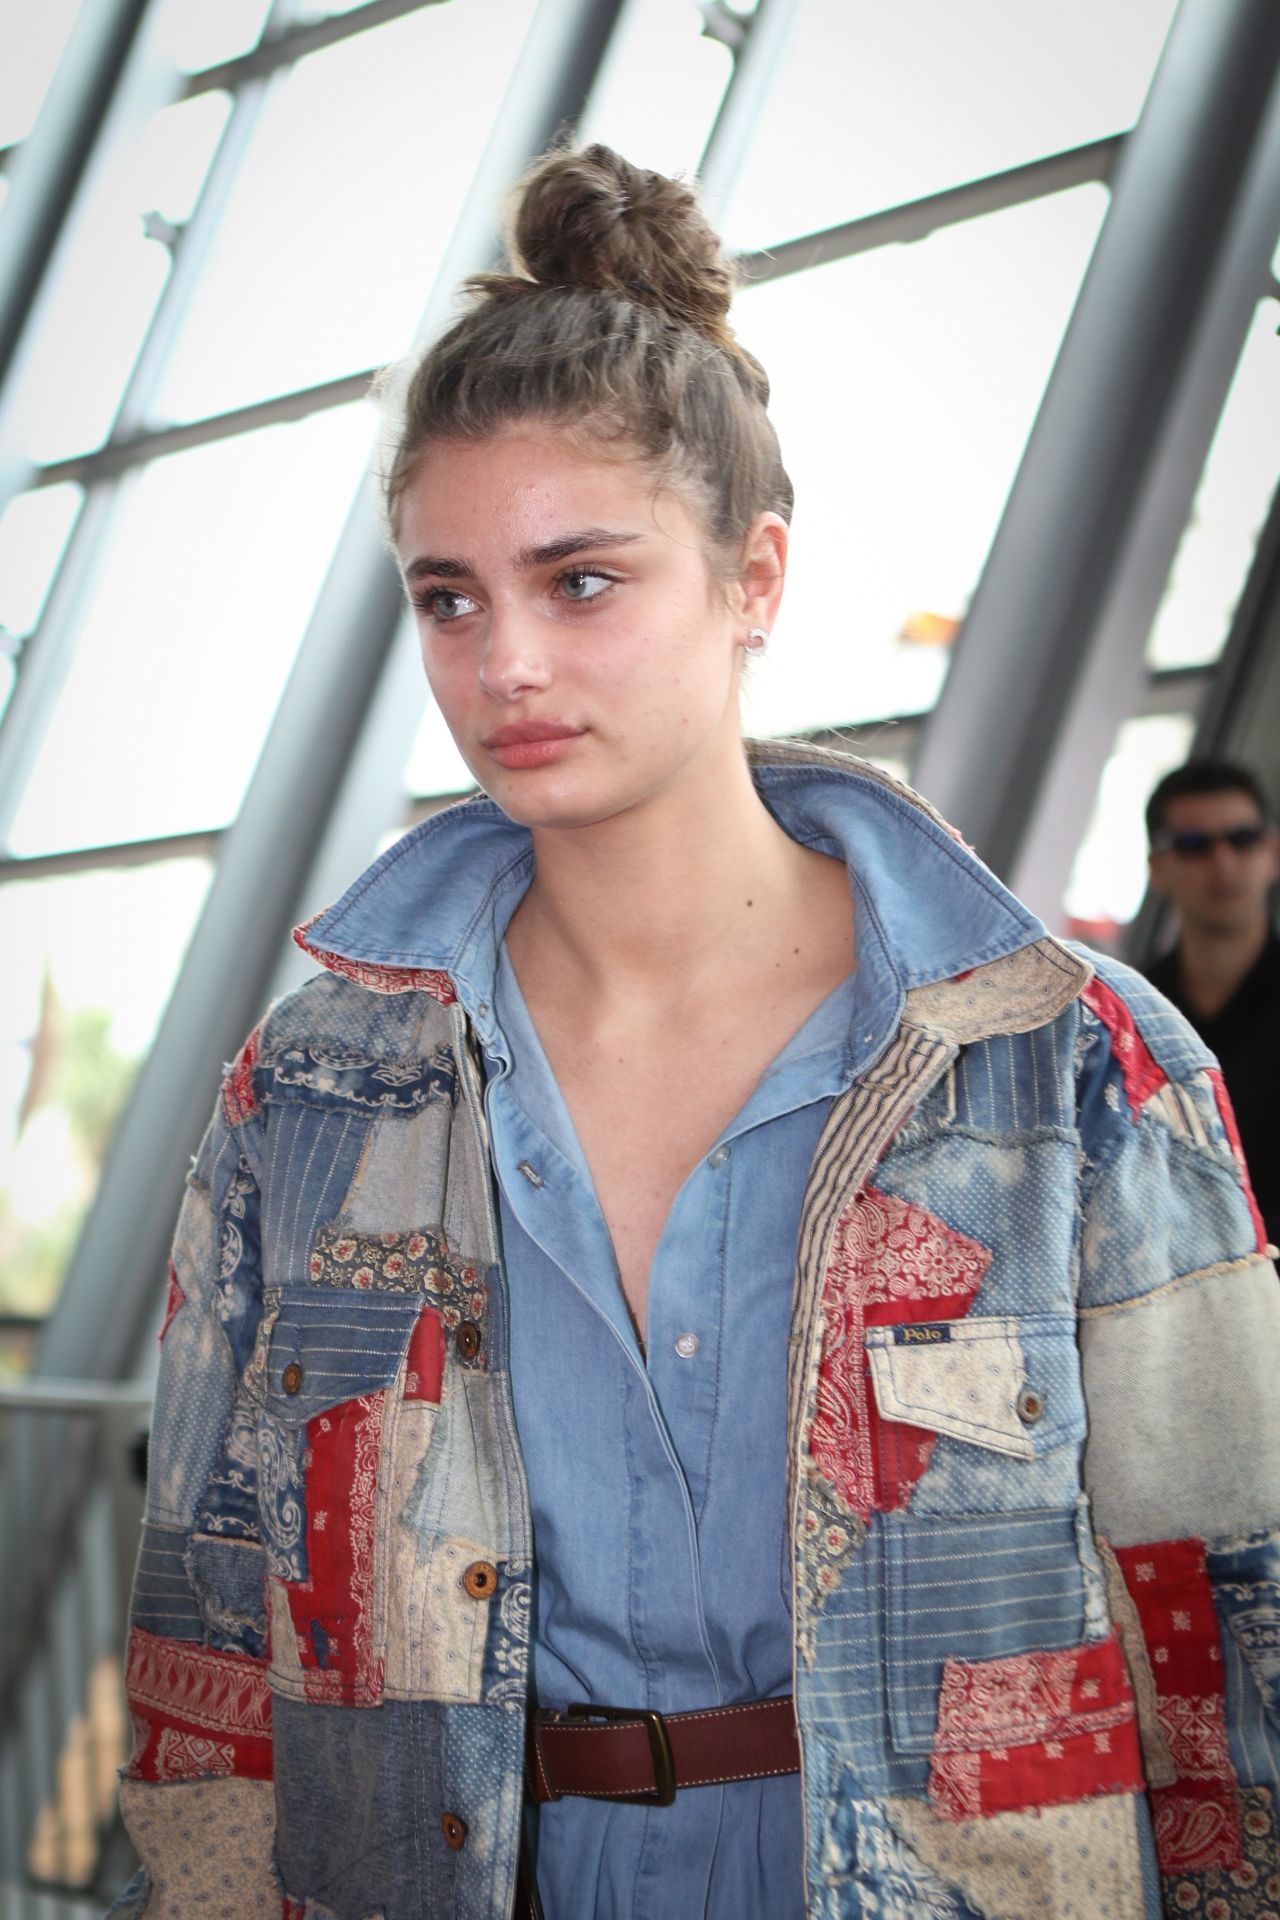 taylor-hill-leaves-from-nice-airport-05-19-2019-1.jpg